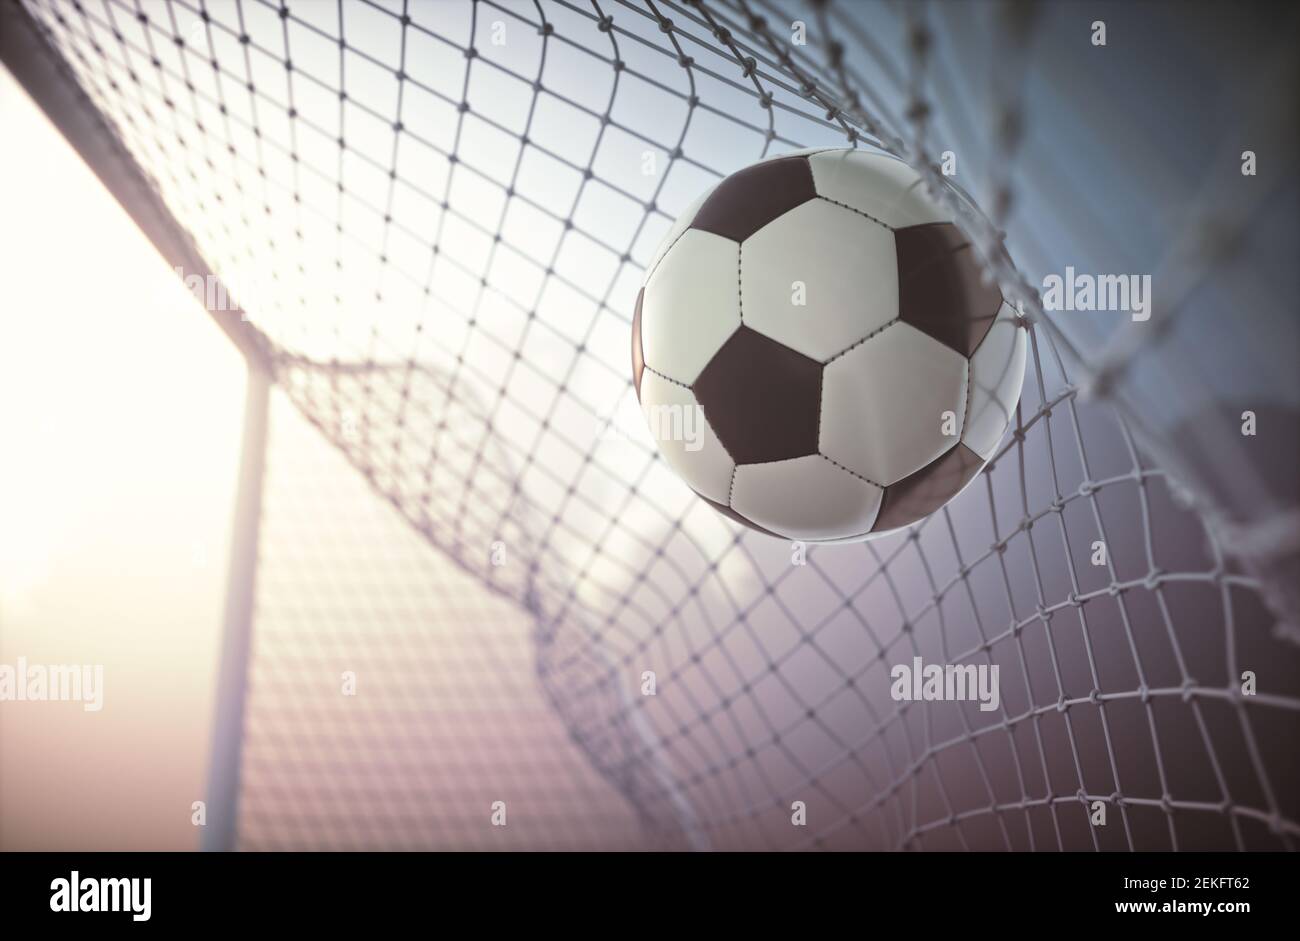 Soccer ball, scoring the goal and moving the net. Stock Photo